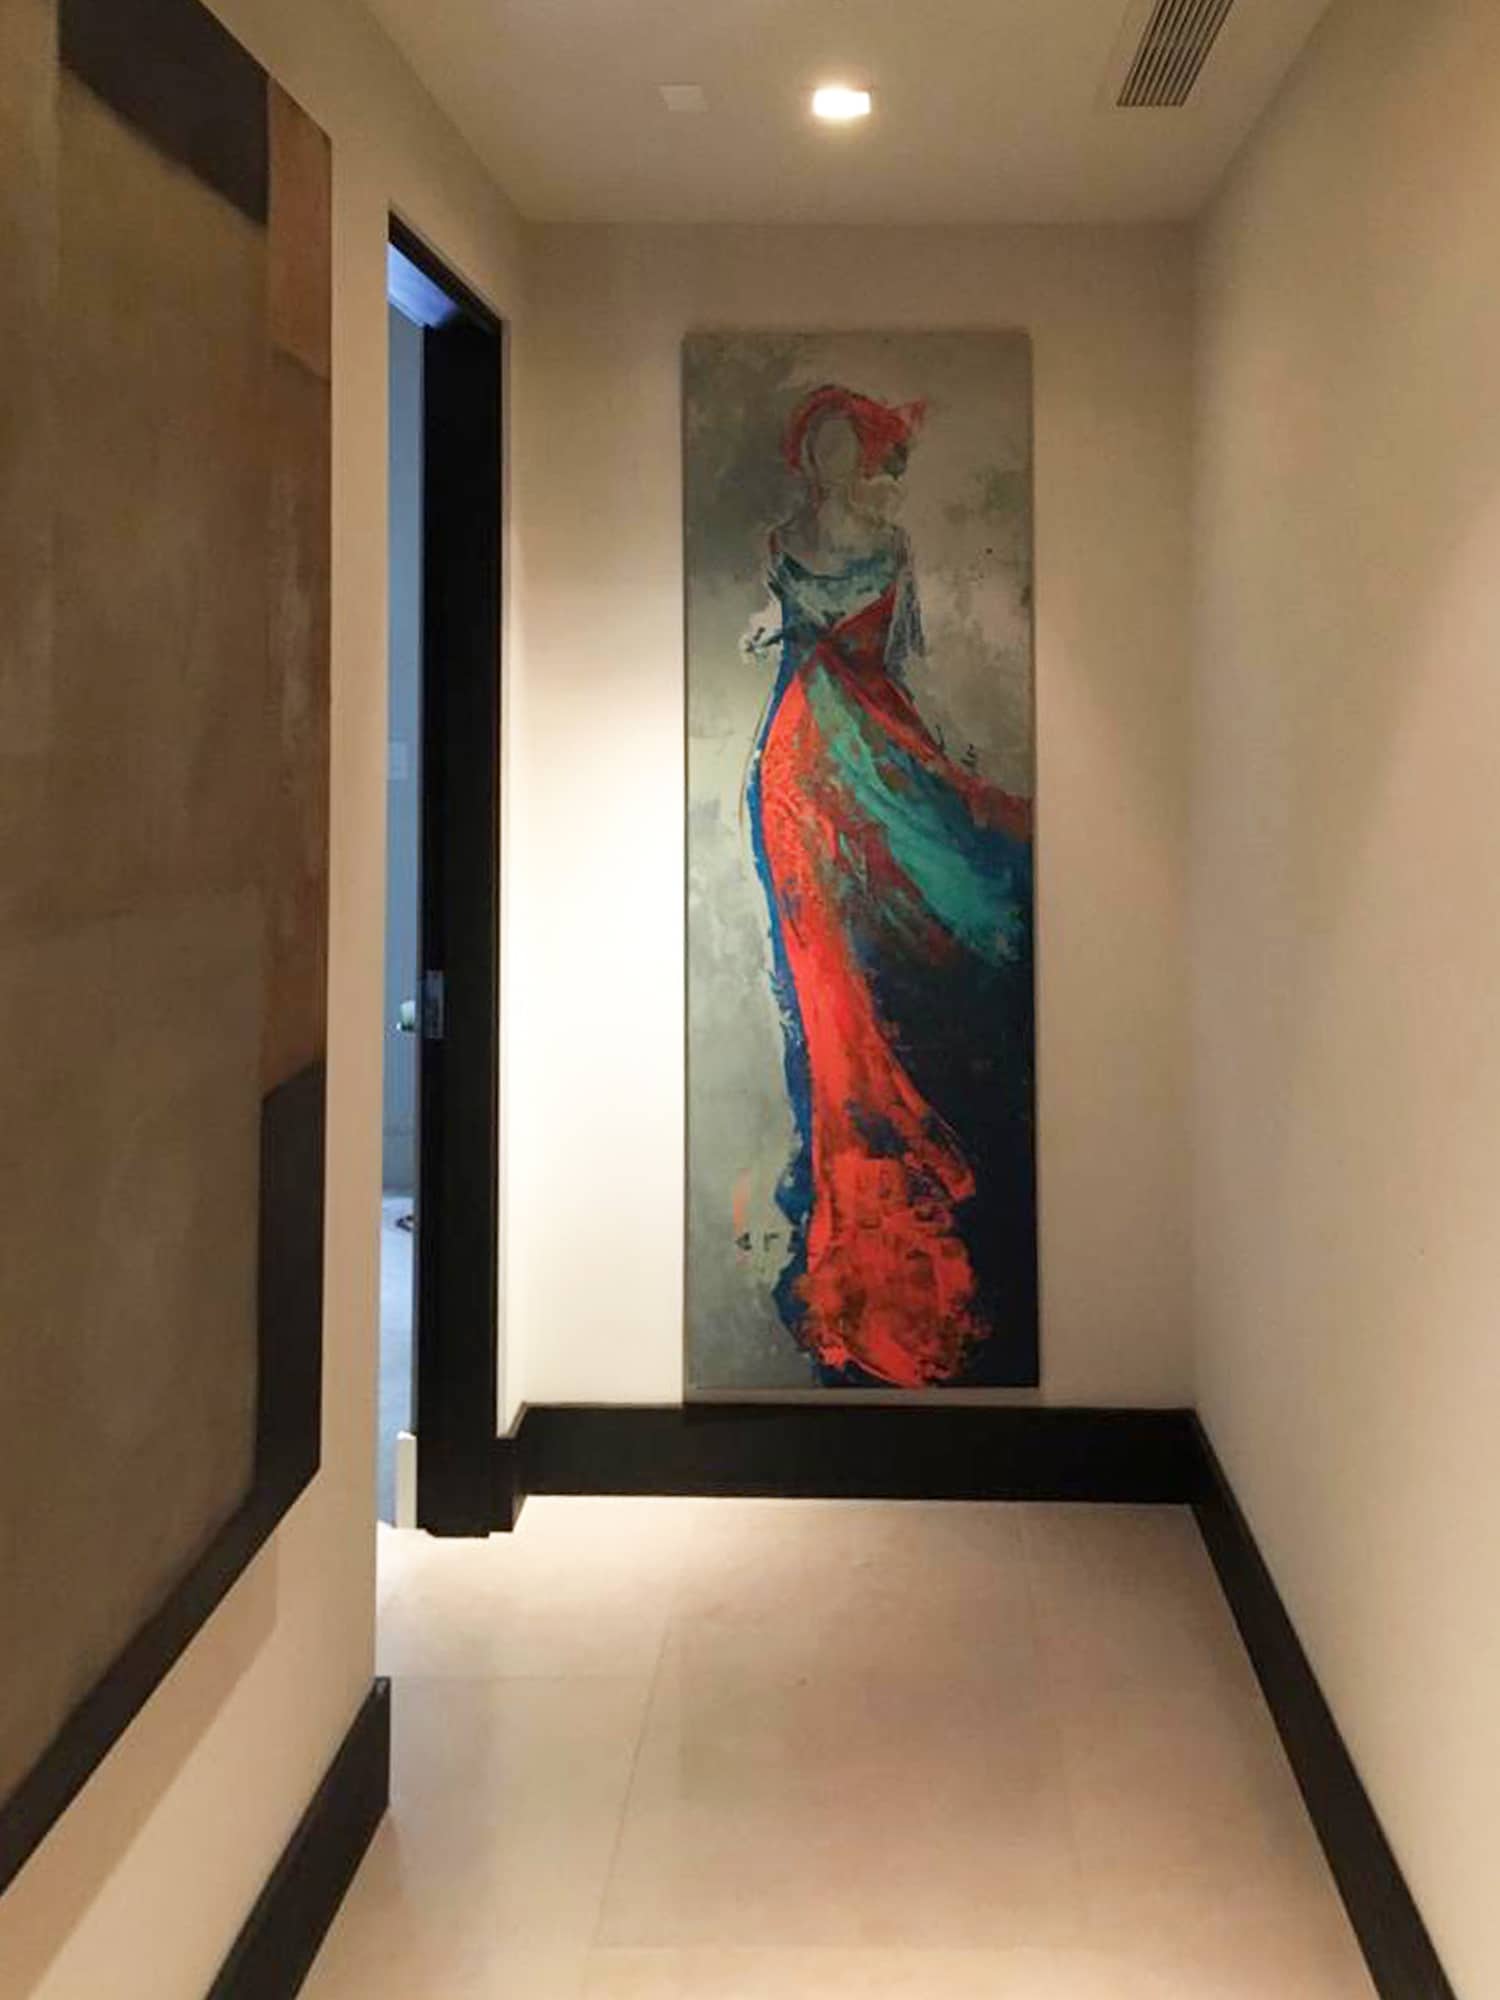 This boldly colored painting by Ana Gallart draws the eye down the hallway